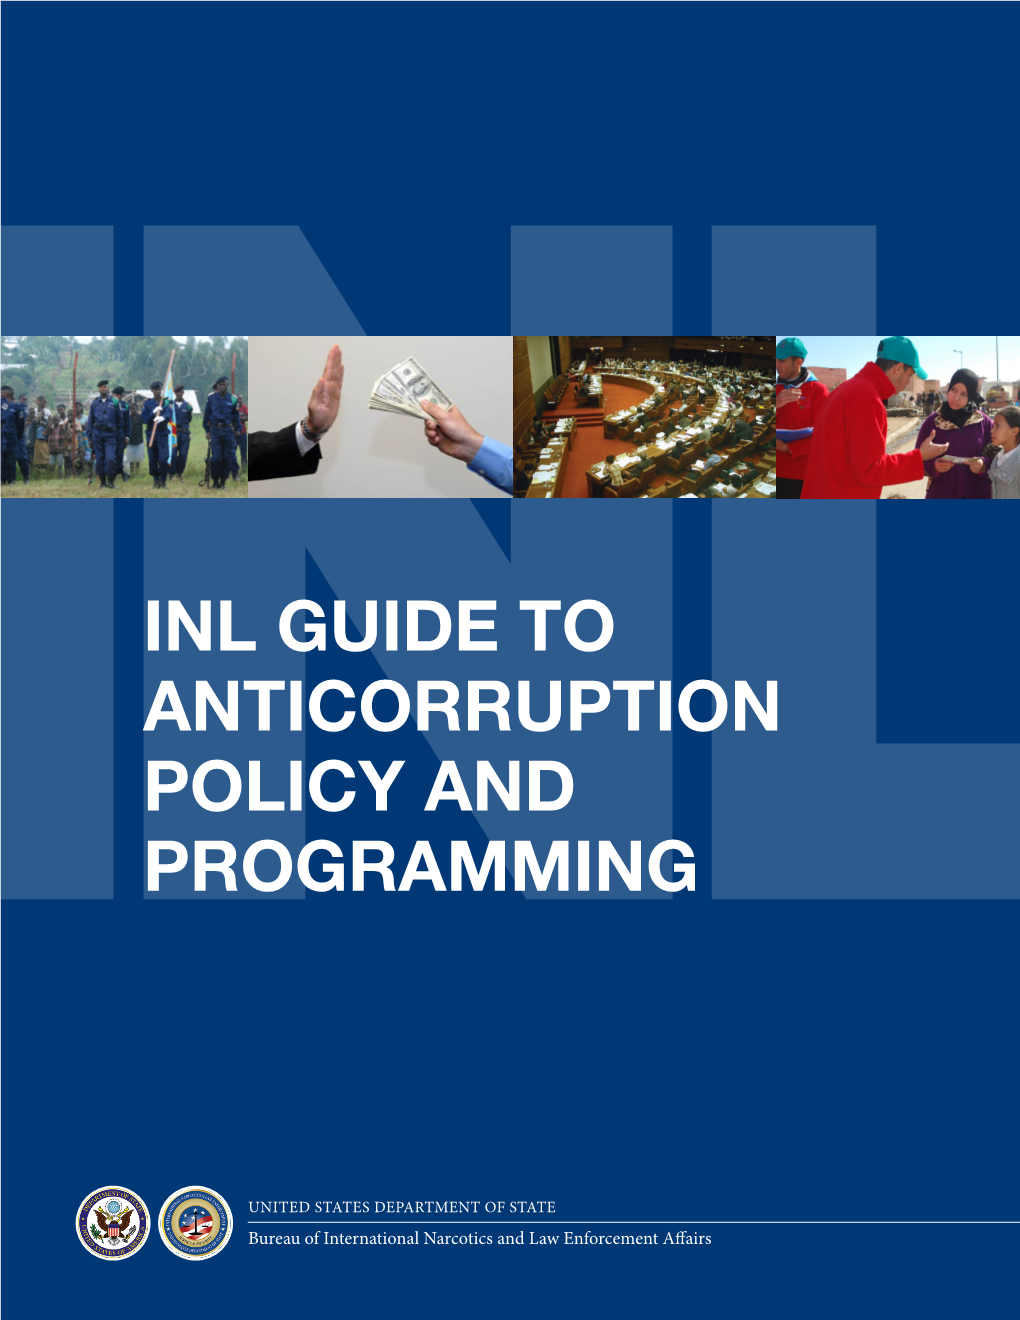 Inl Guide to Anticorruption Policy and Programming